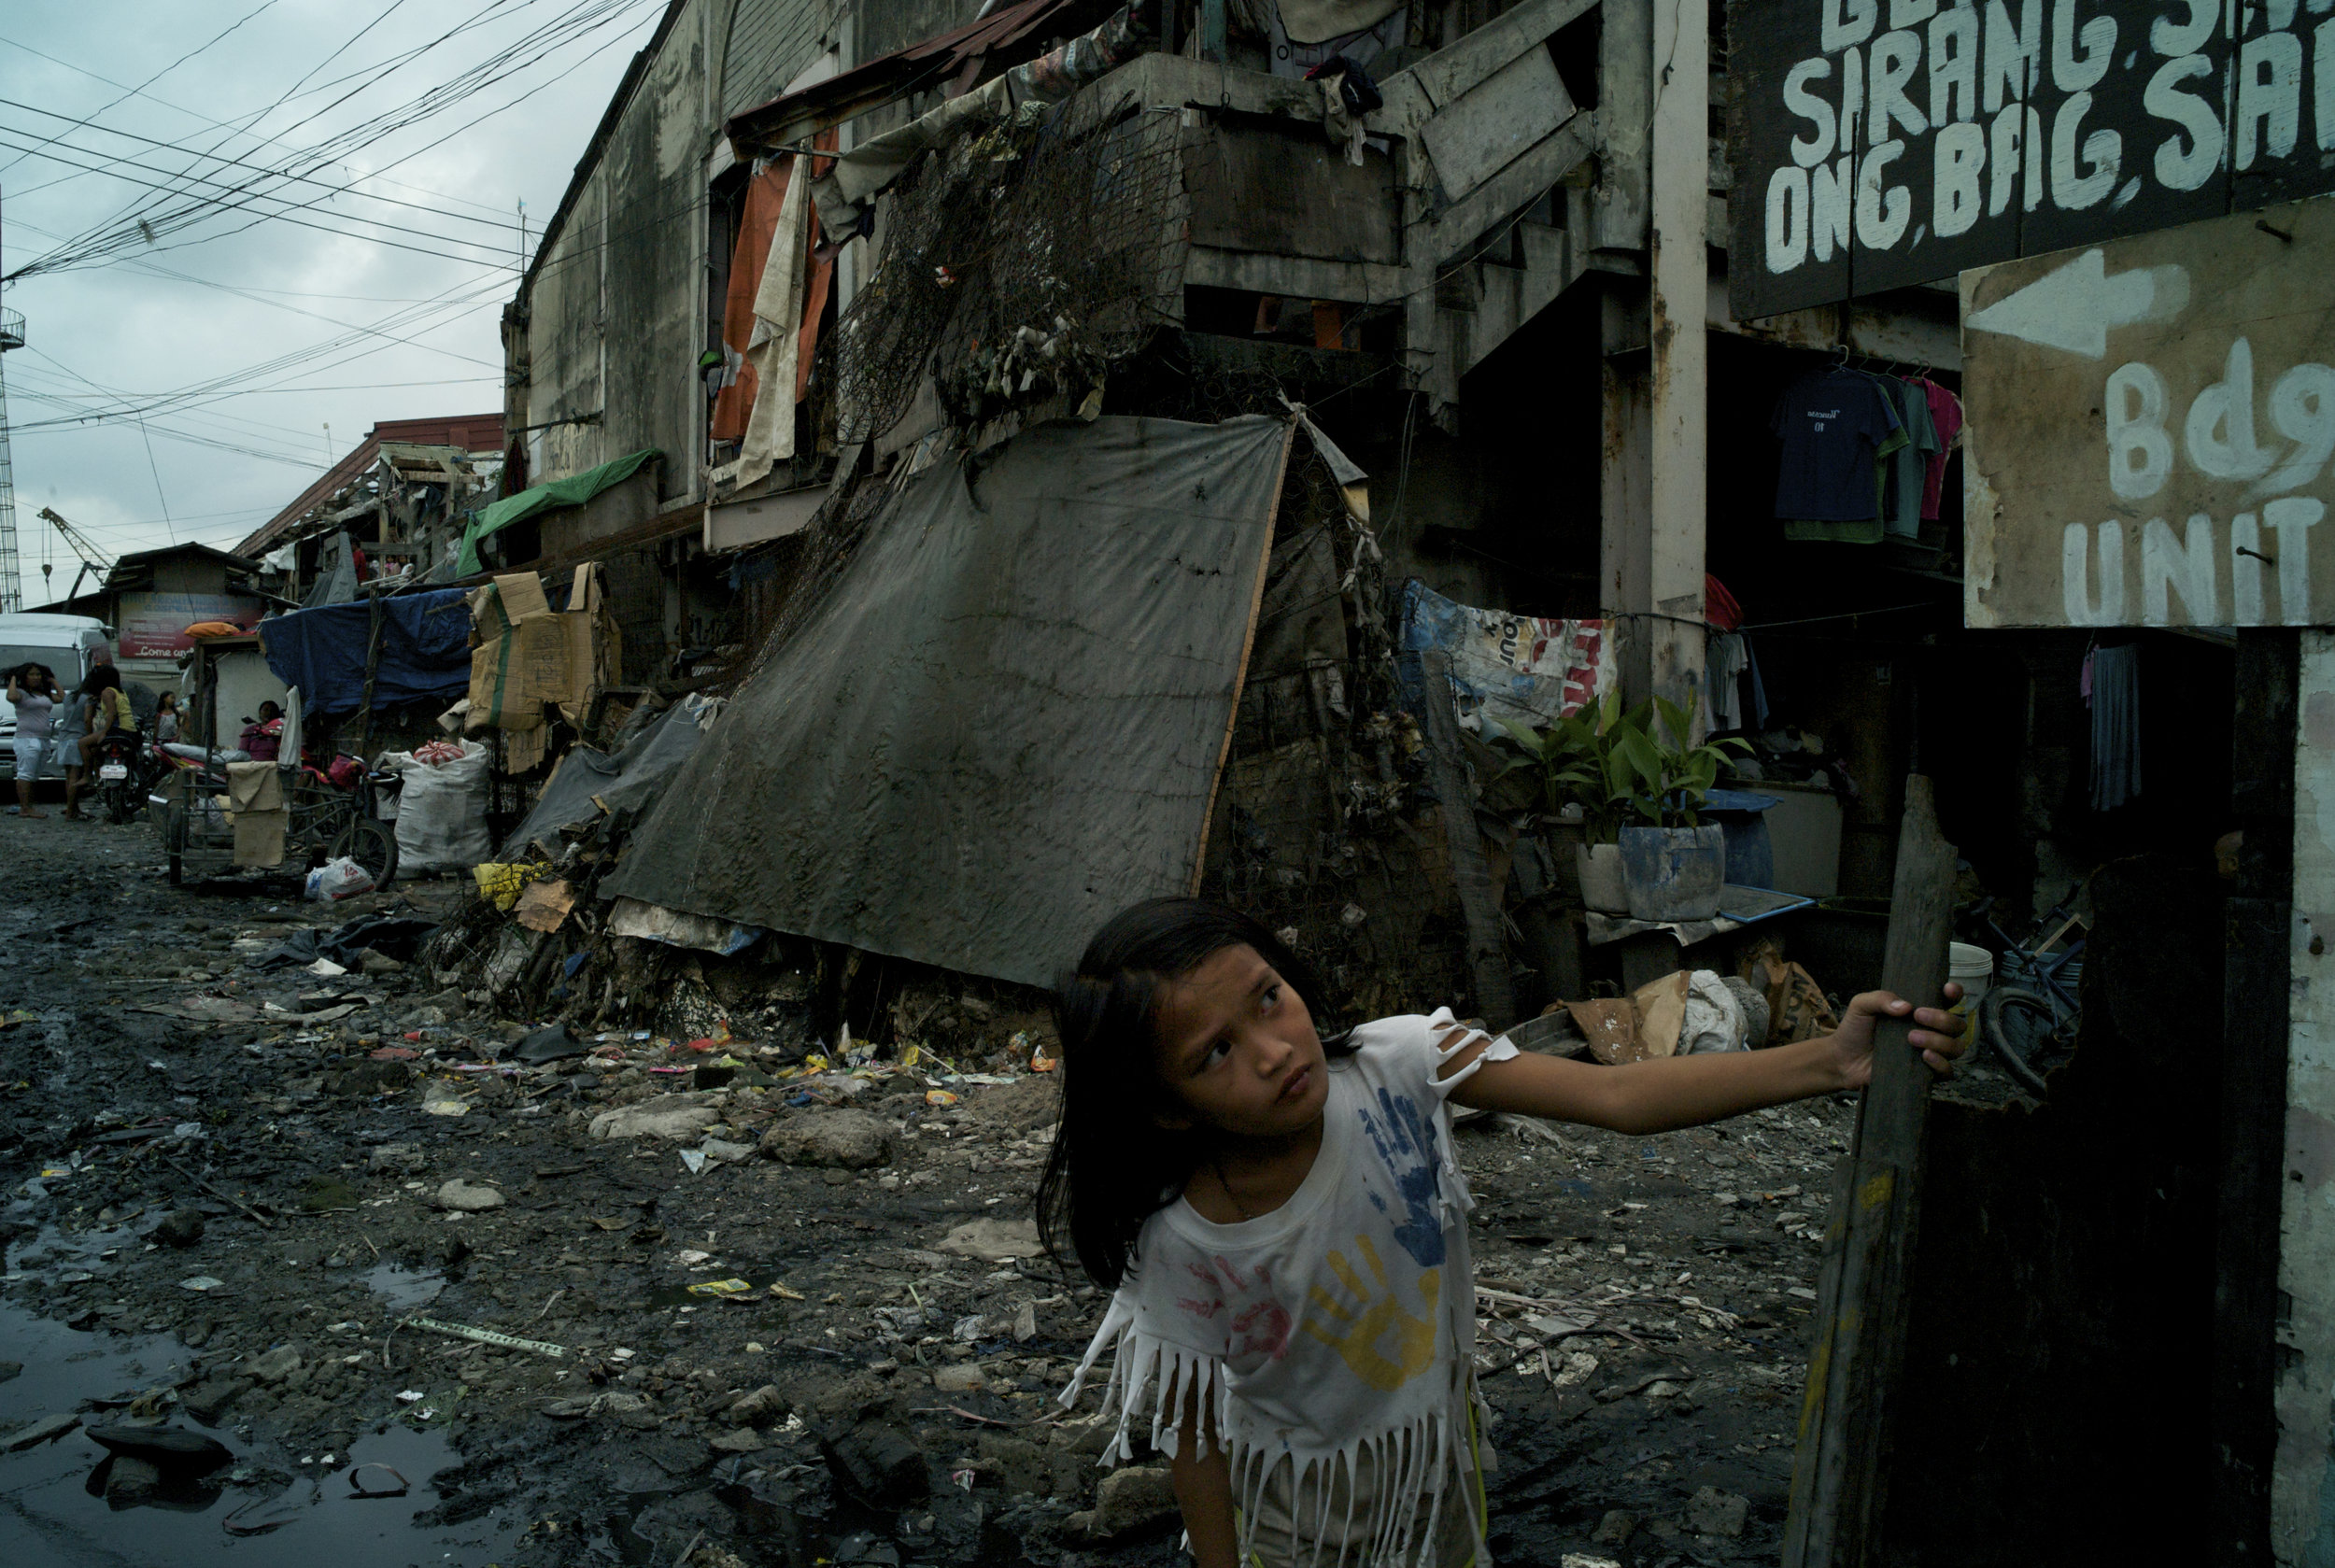  MANILA, THE PHILIPPINES; JUNE 2103 
-	Swinging from a wooden post, a young girl makes her way through the flooded, rubbish strewn streets that crisscross the temporary government tenements of Aroma. Originally designated as a short-term resettlement